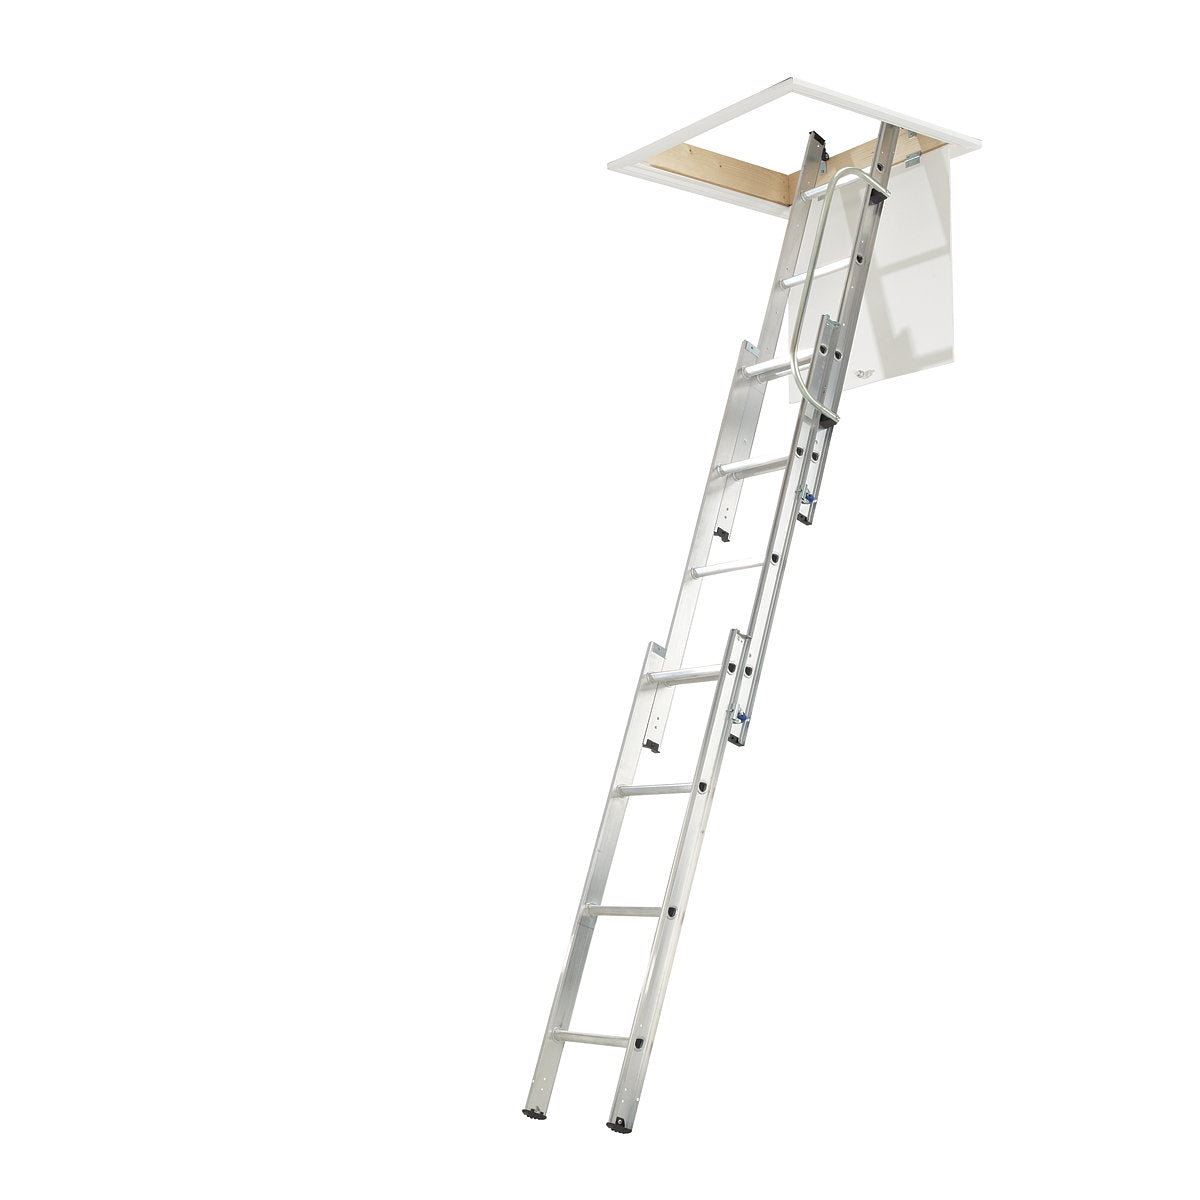 Werner - Loft Ladder With Handrail 3 Section